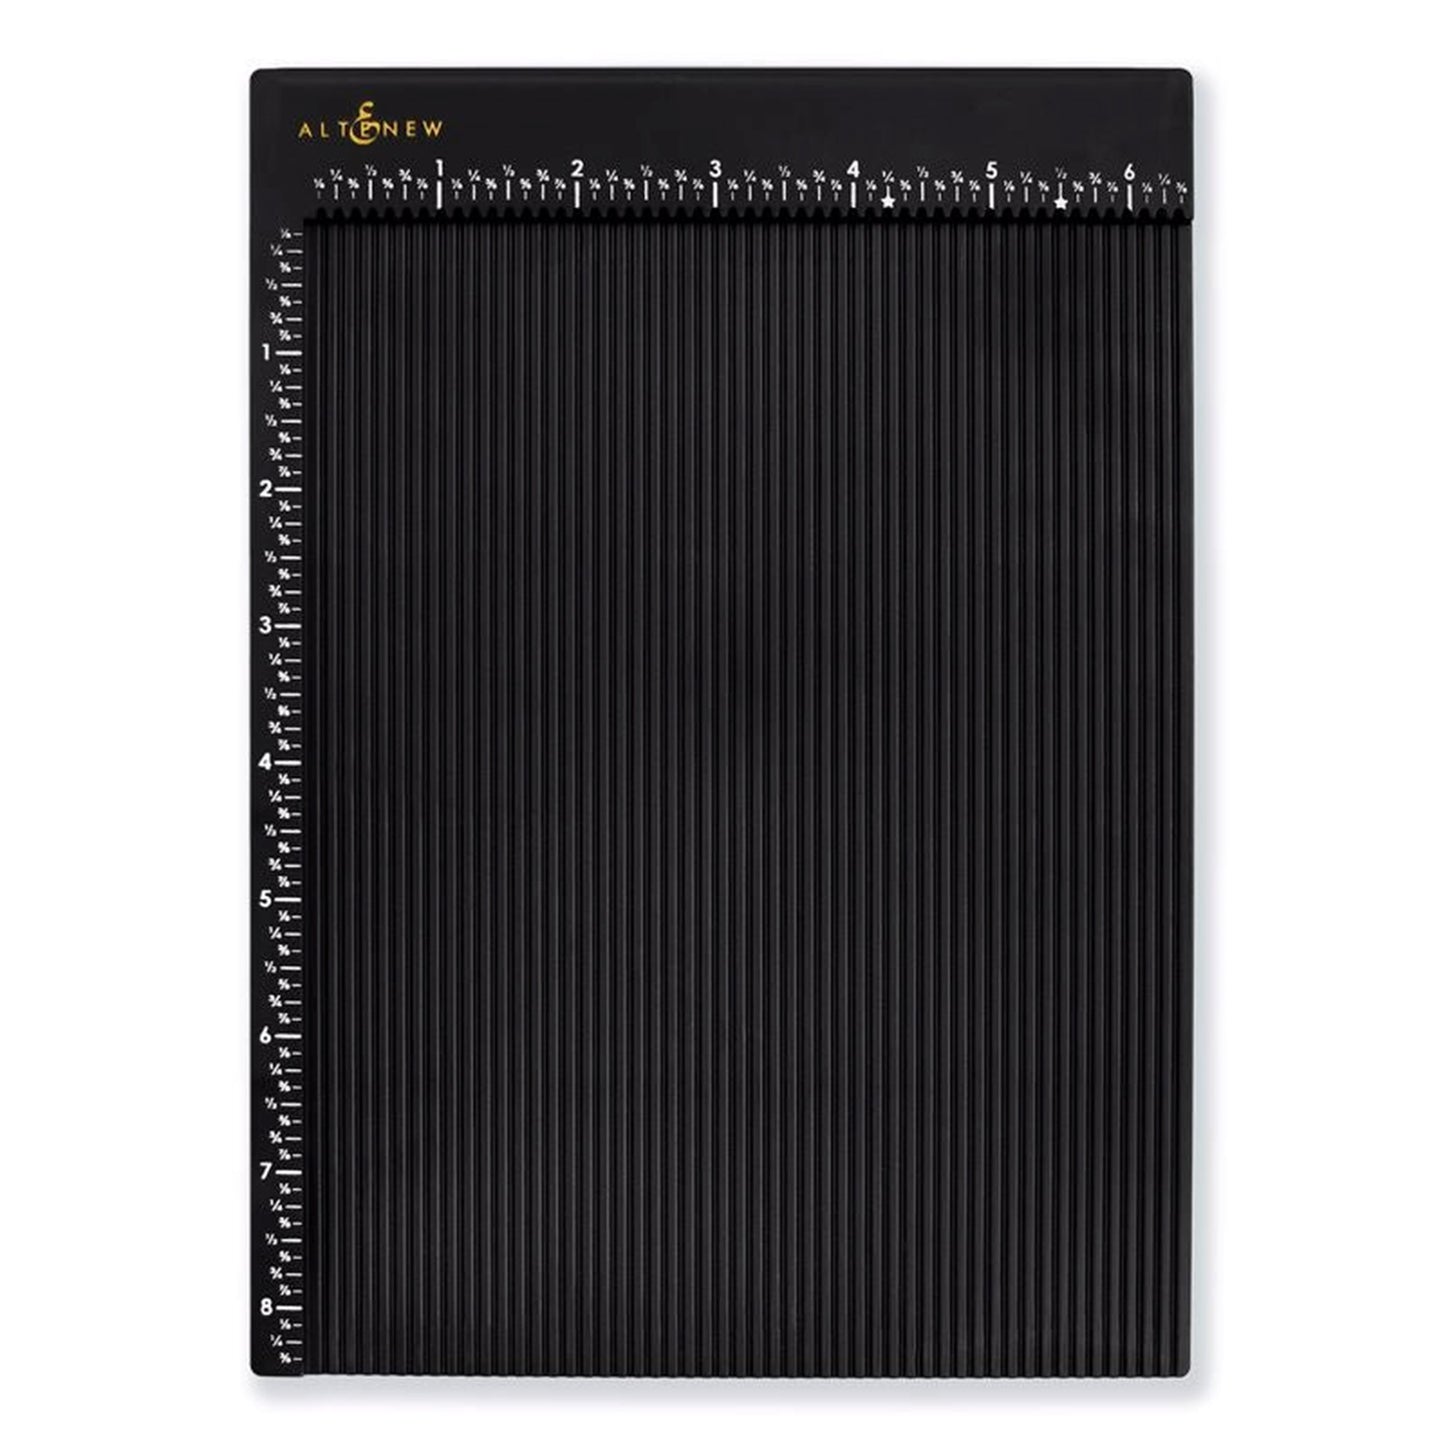 Altenew - Crafters Essential Scoring Board - out of stock